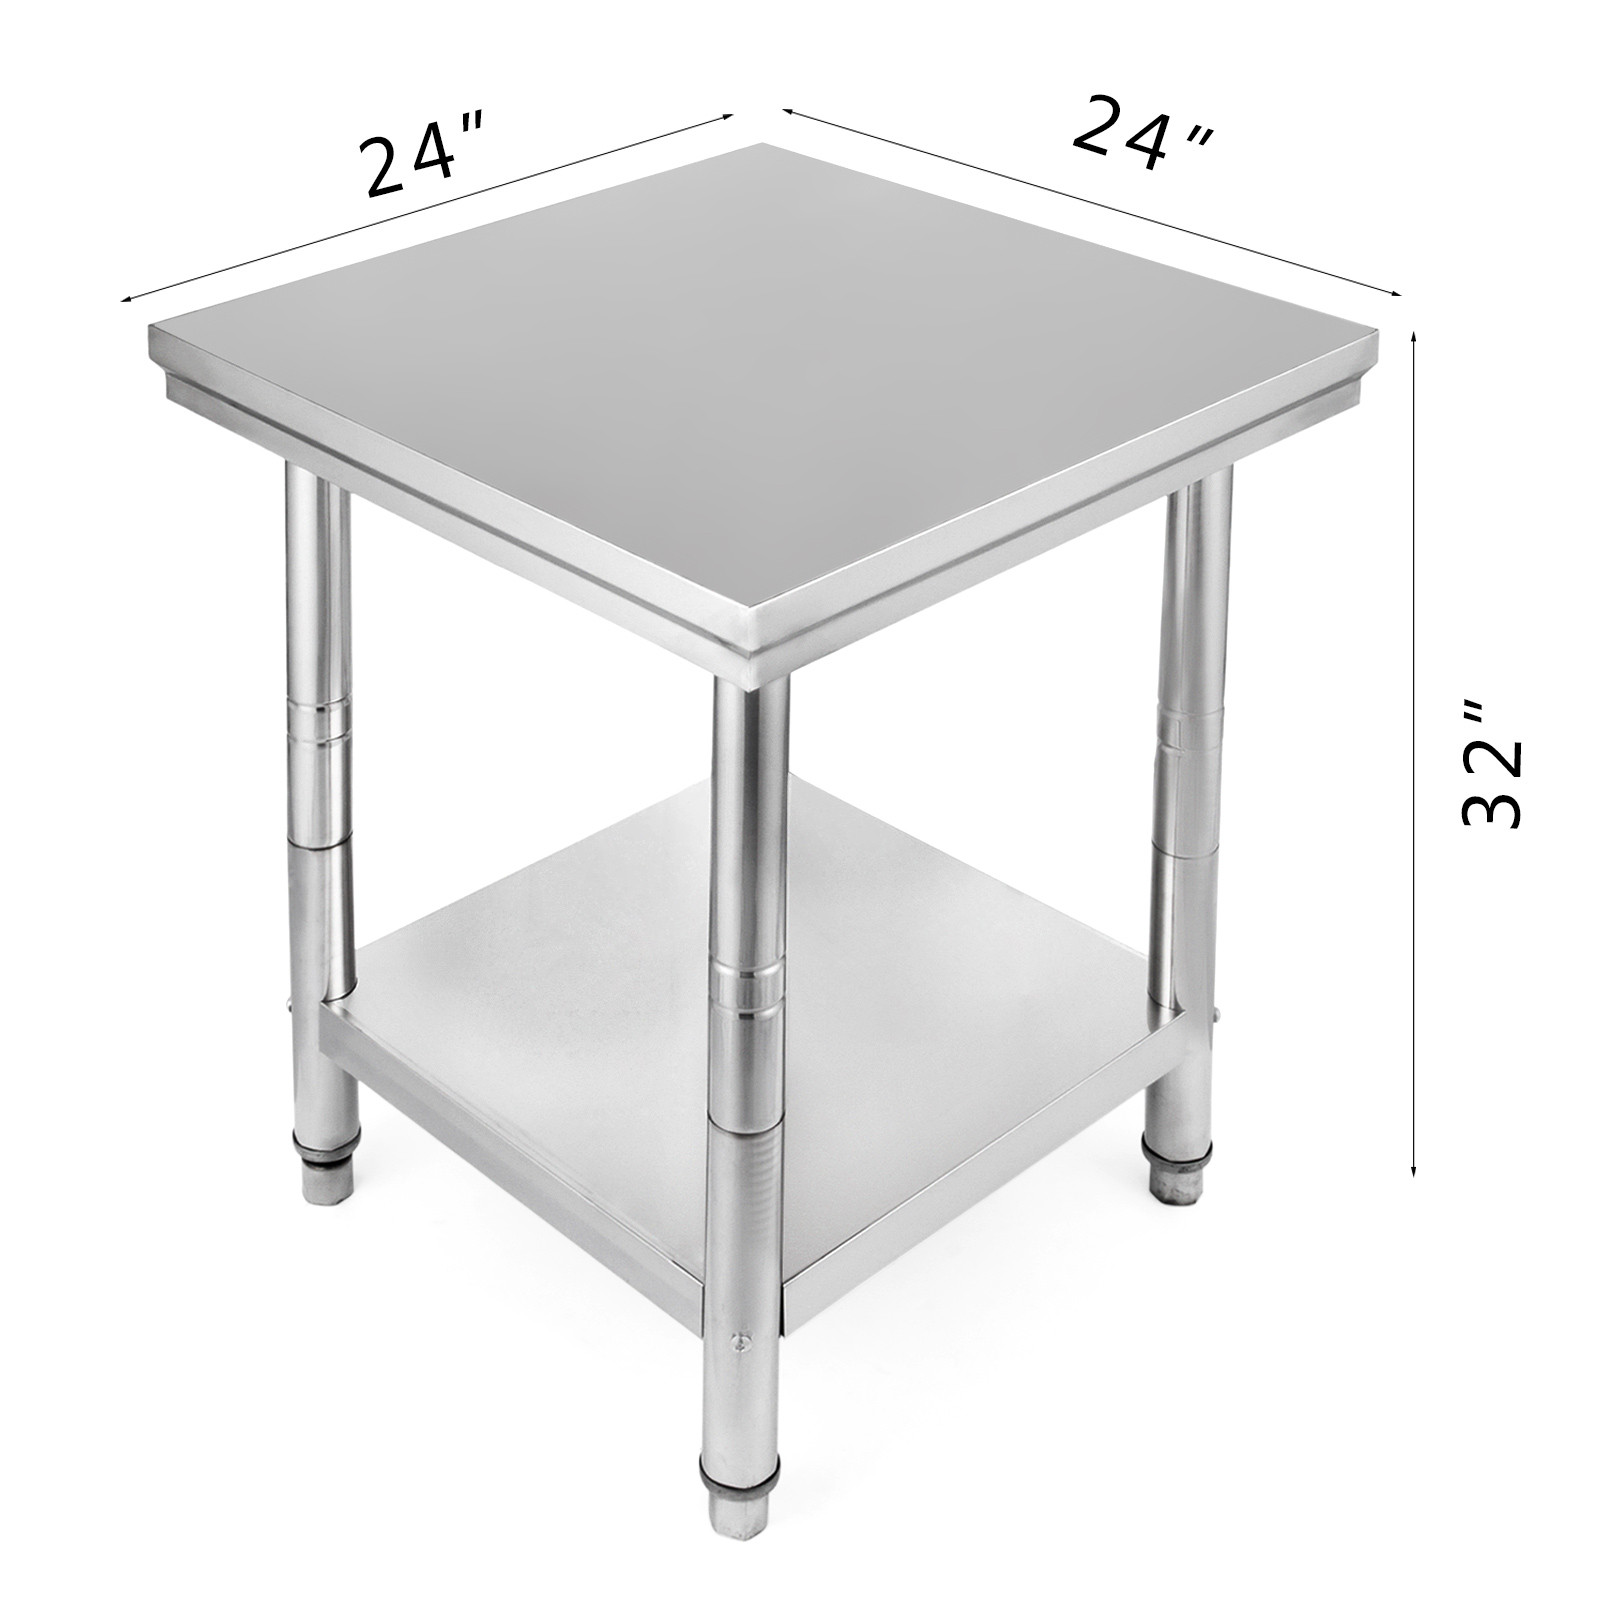 Kitchen Work Tables With Storage
 Work Table Kitchen 60X60 CM mercial Table Stainless